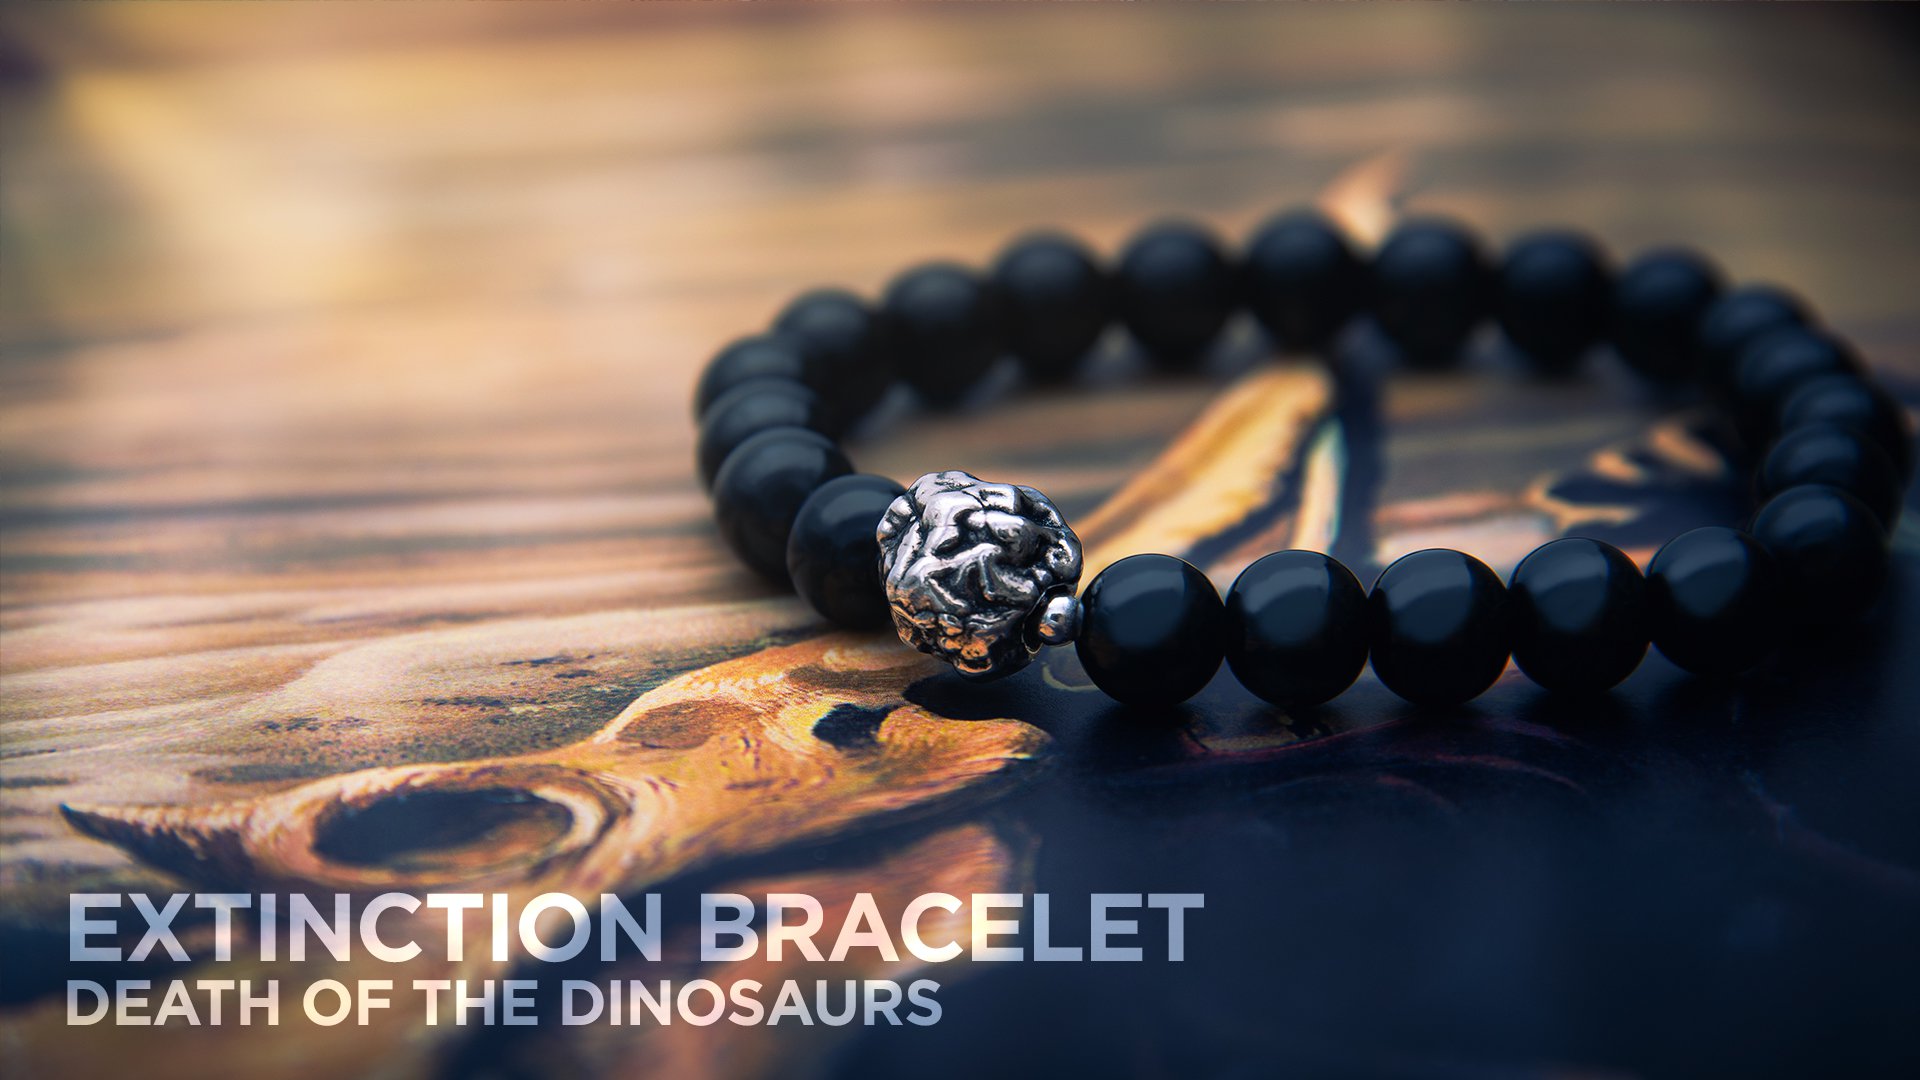 Extinction Bracelet - Death of the Dinosaurs - Infused with K-Pg Boundary Material